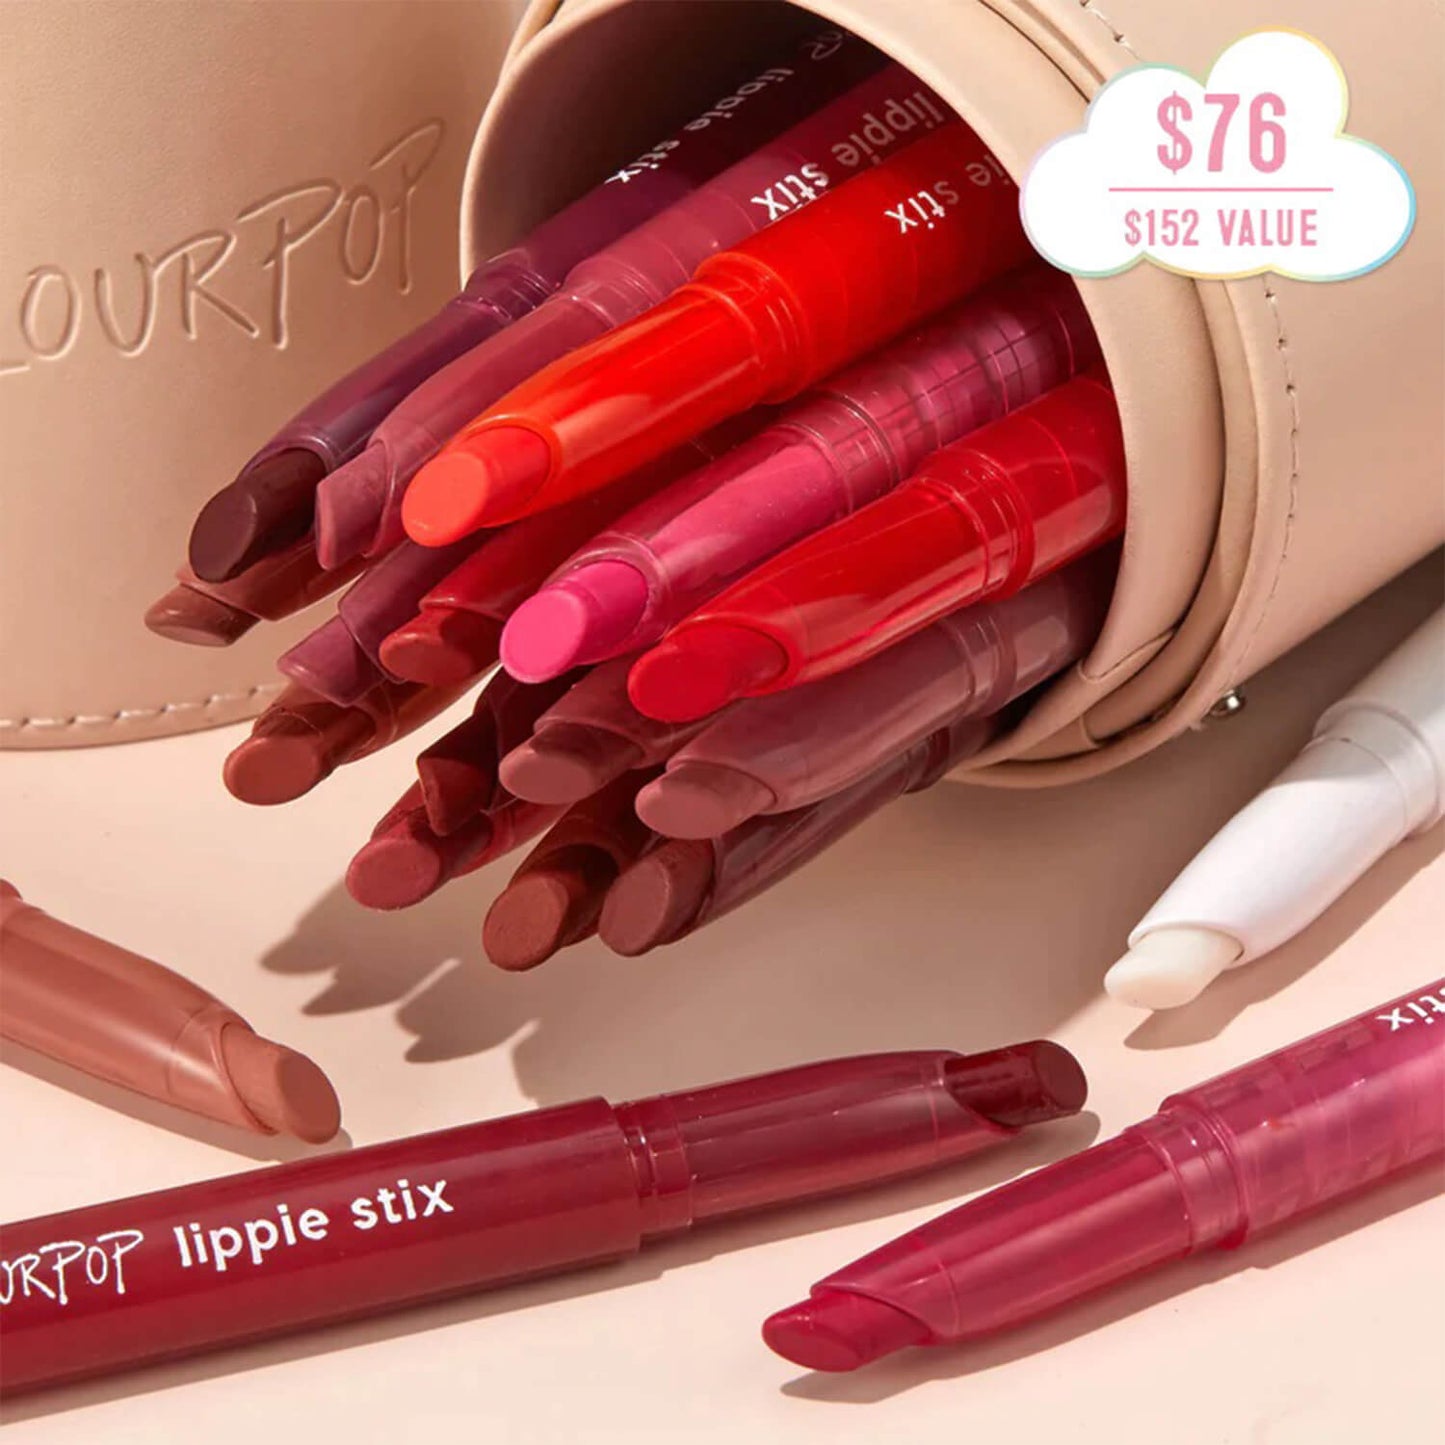 Shop Colourpop Essentialy Yours Lippie Stix Stash cup available at Heygirl.pk for delivery in Pakistan